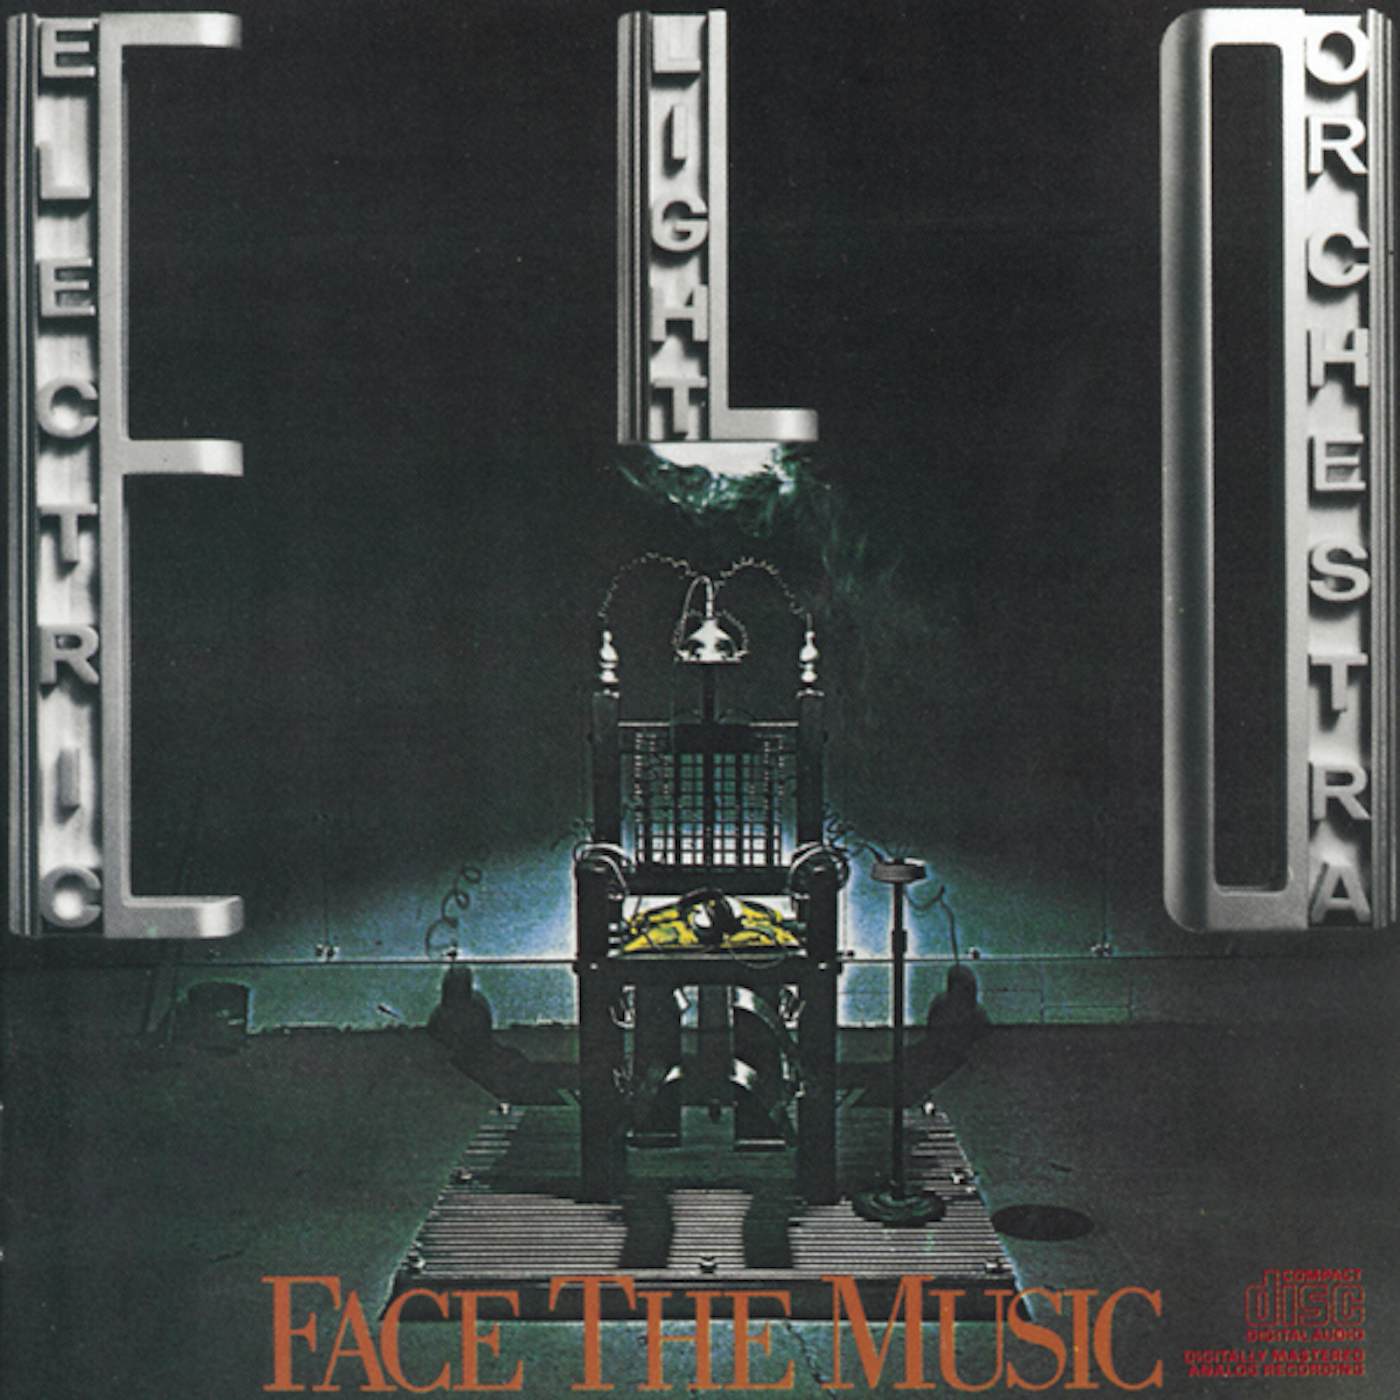 ELO (Electric Light Orchestra) FACE THE MUSIC CD